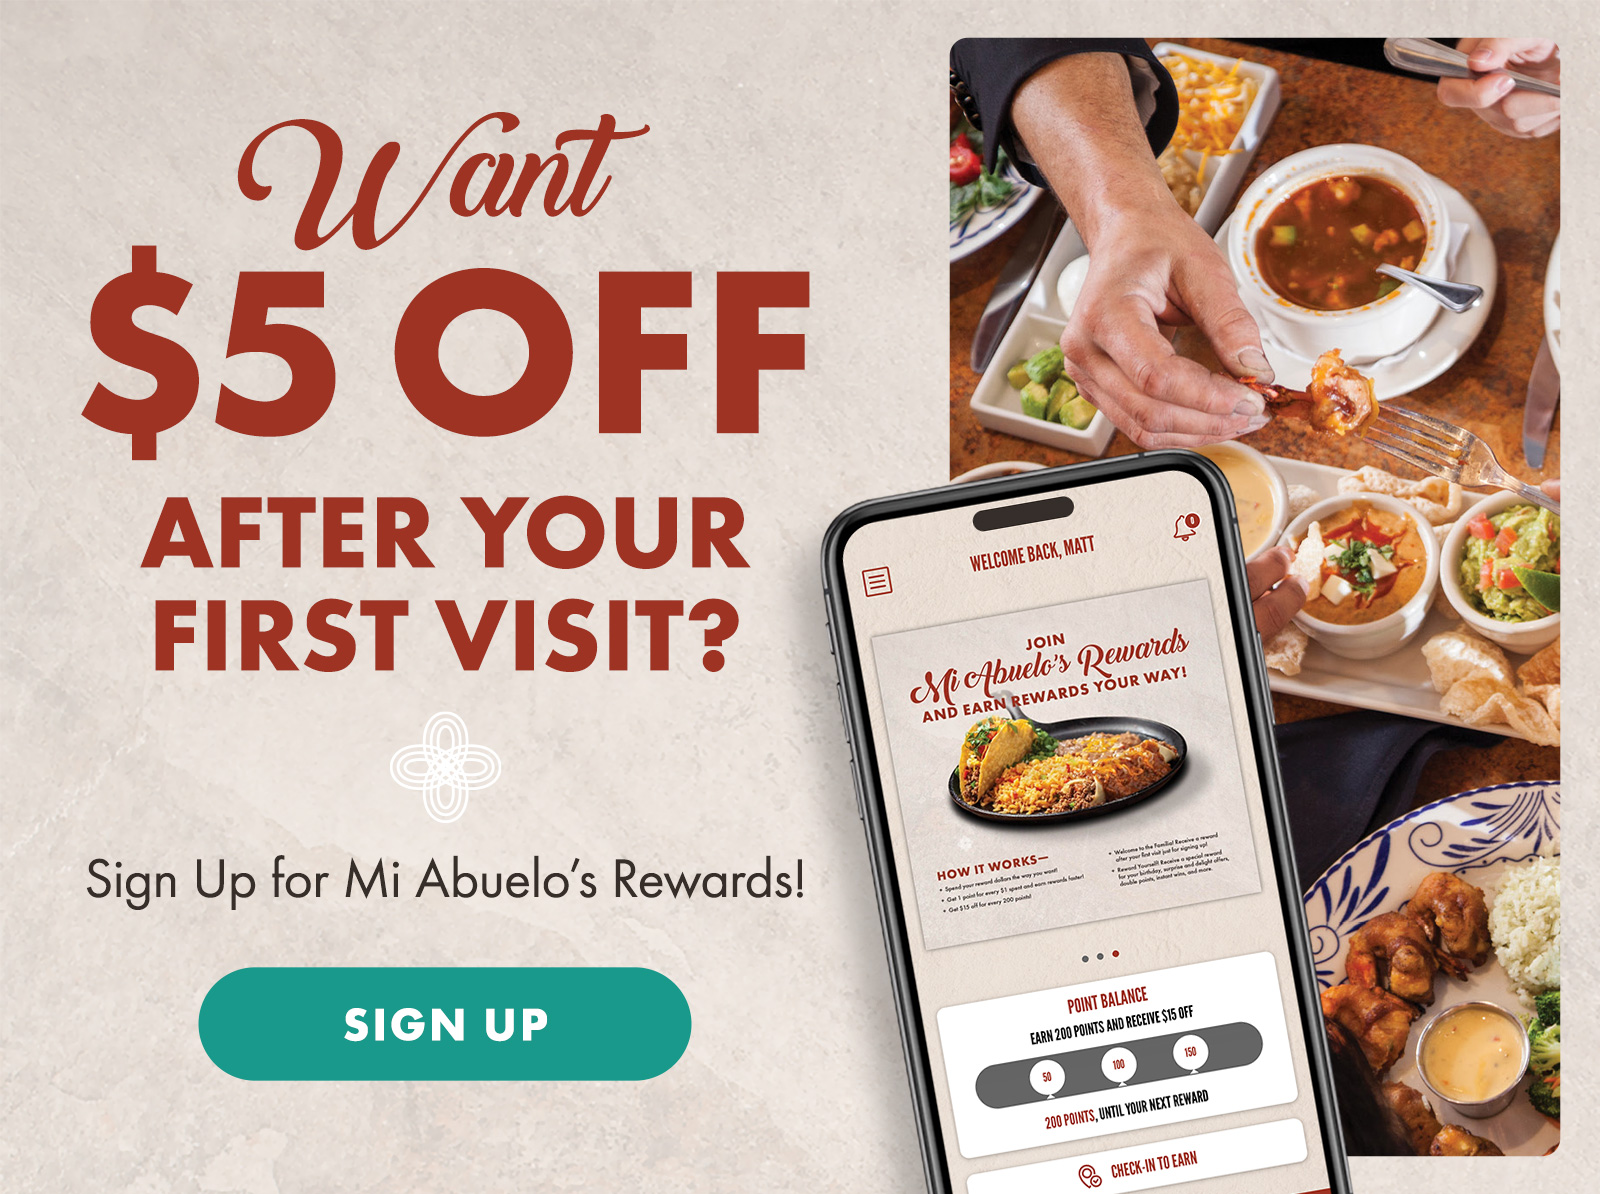 Want $5 off after your first visit? Sign up for Mi Abuelo's Rewards!